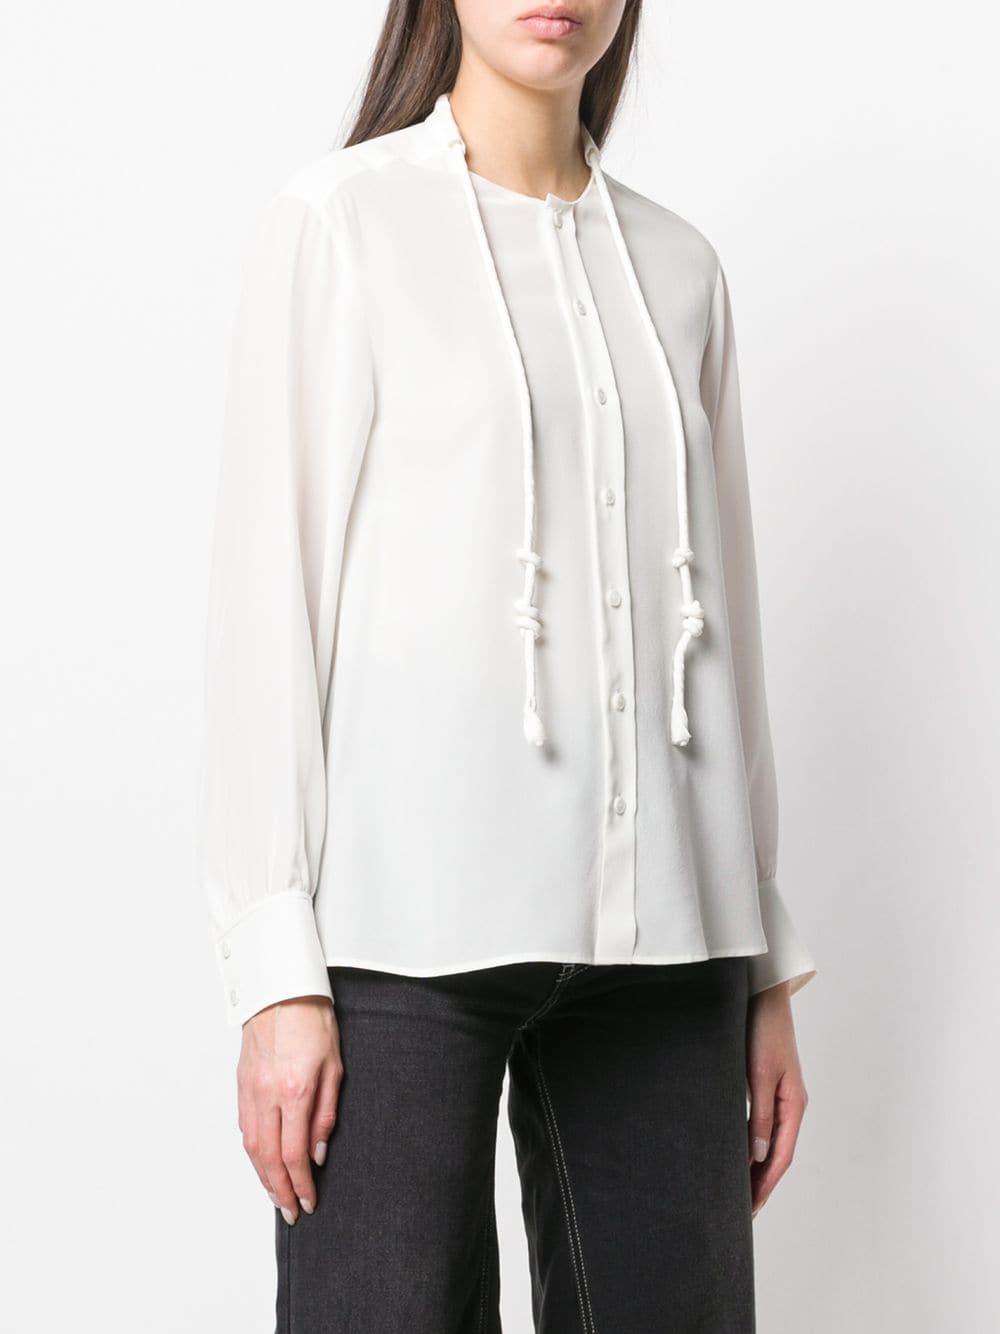 Elegant Lace Blouse - SS19 Collection